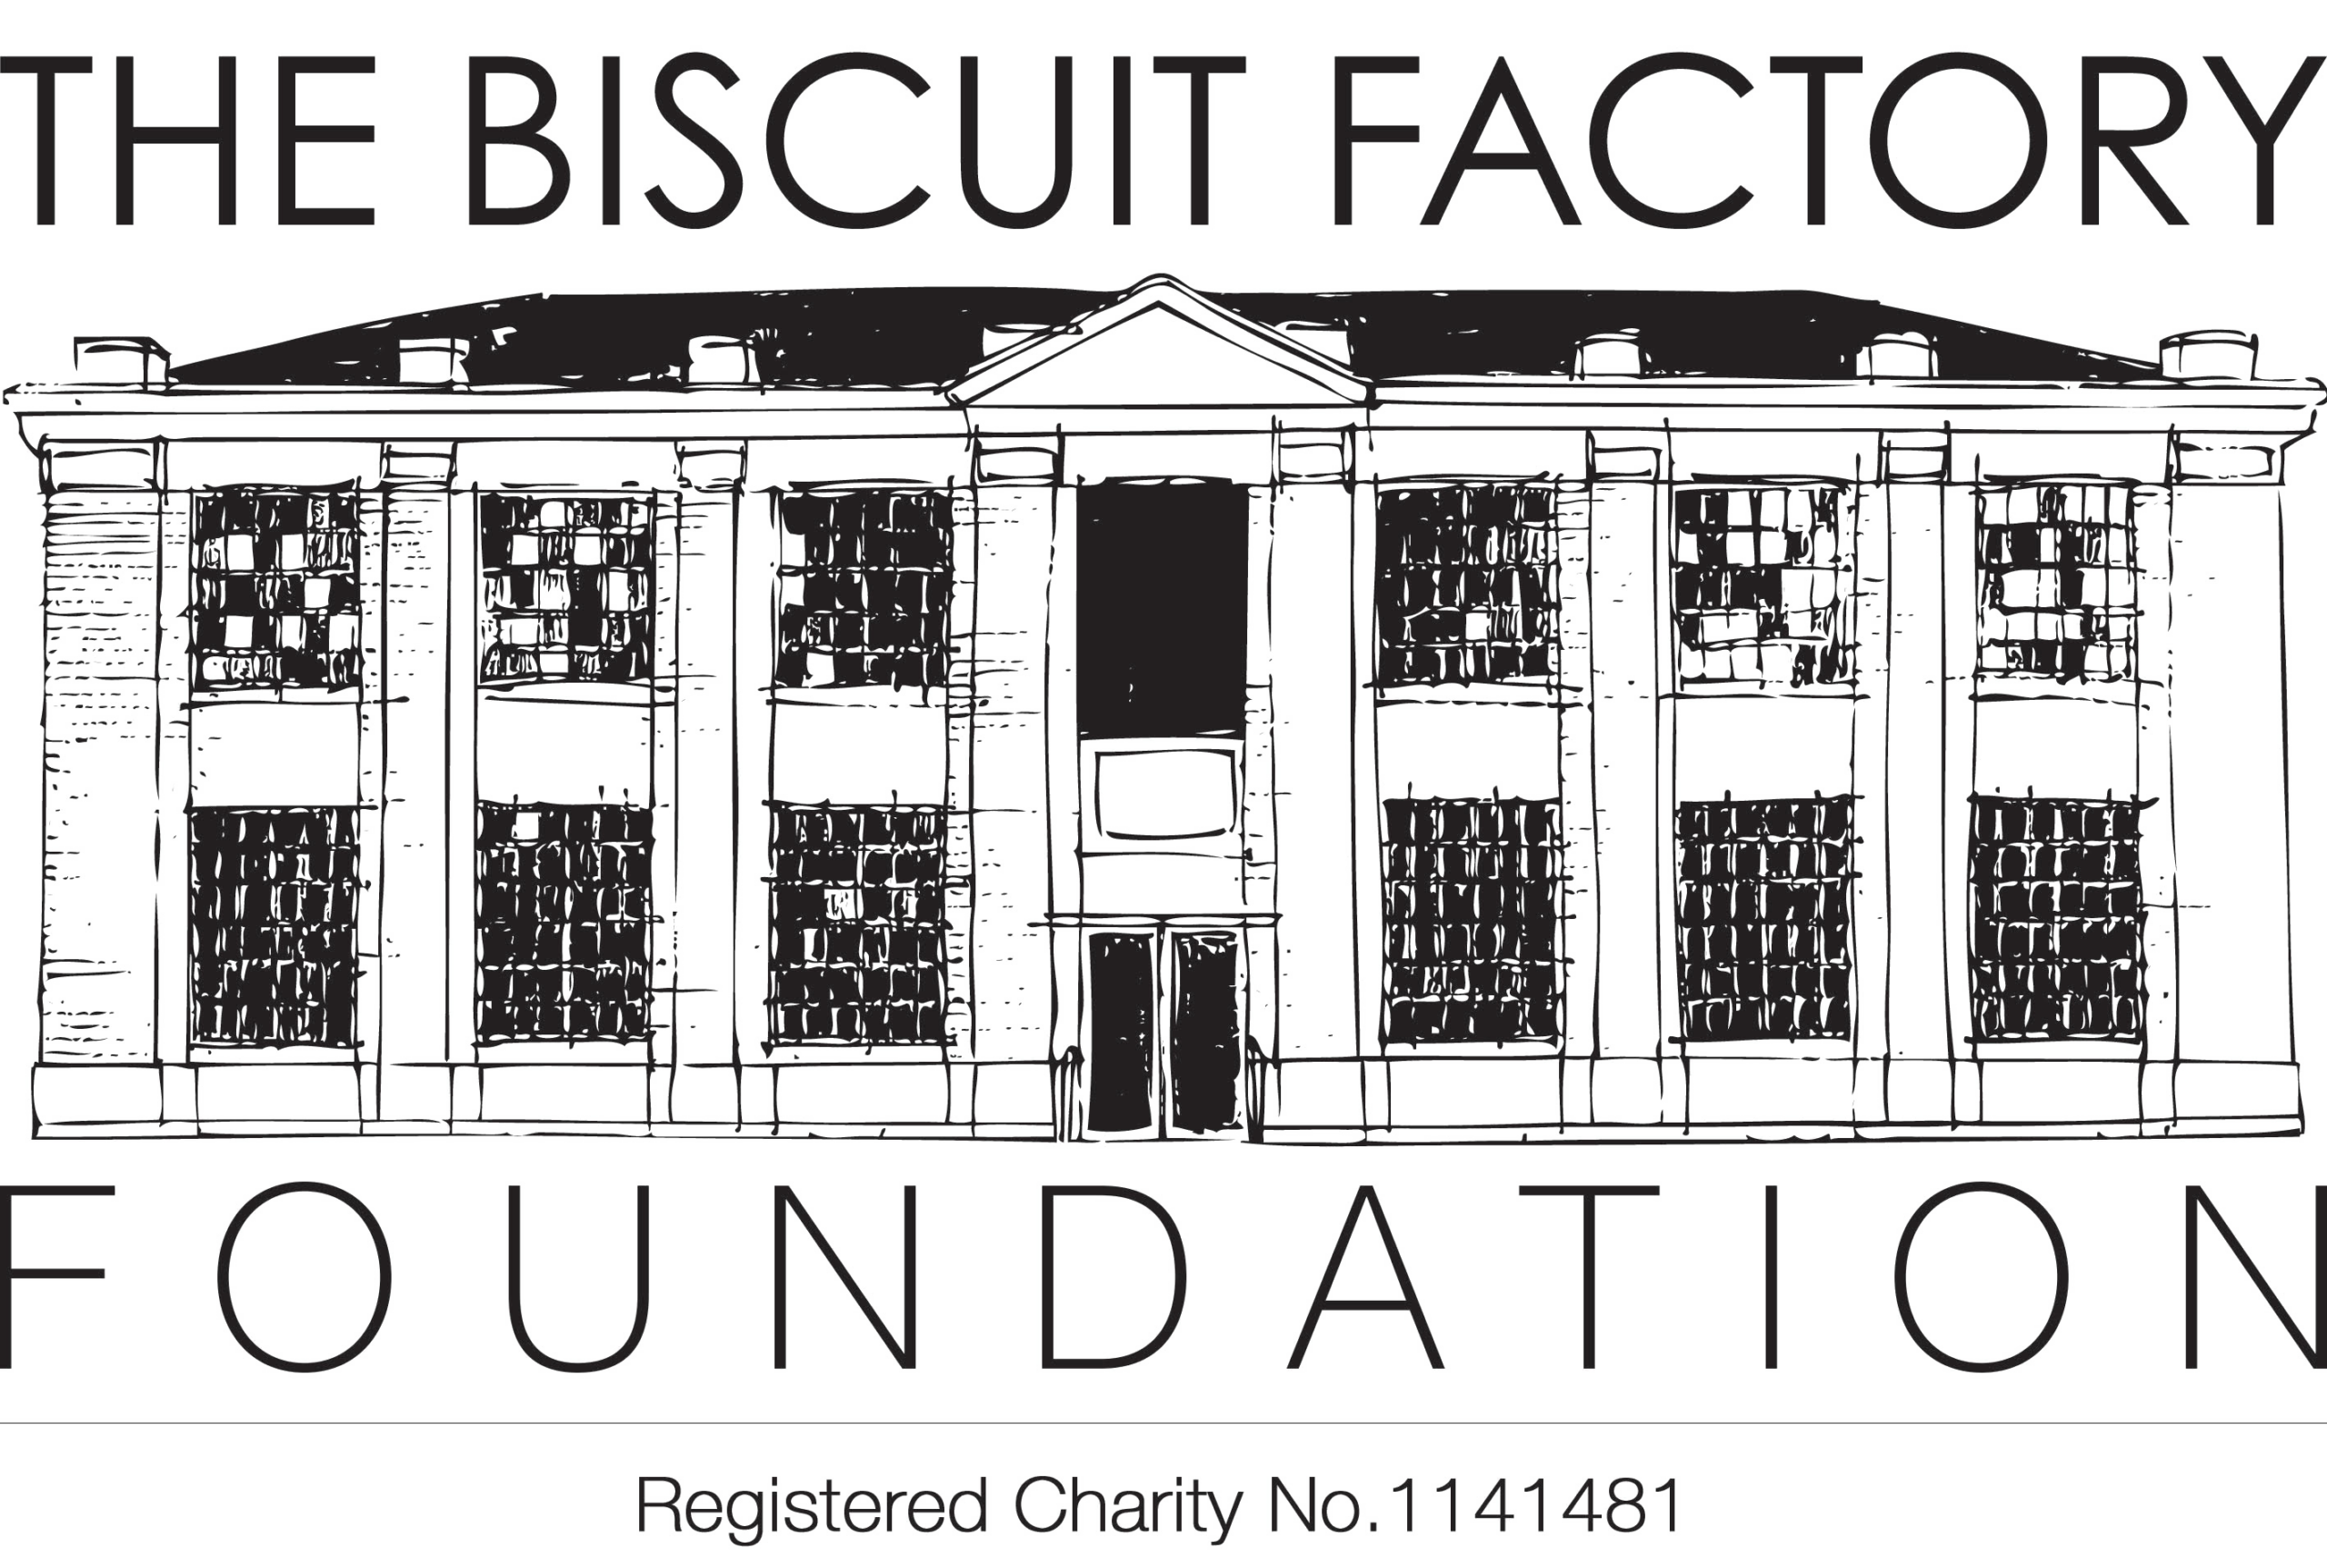 The Biscuit Factory Foundation Logo which features a drawing of the front of their gallery space.